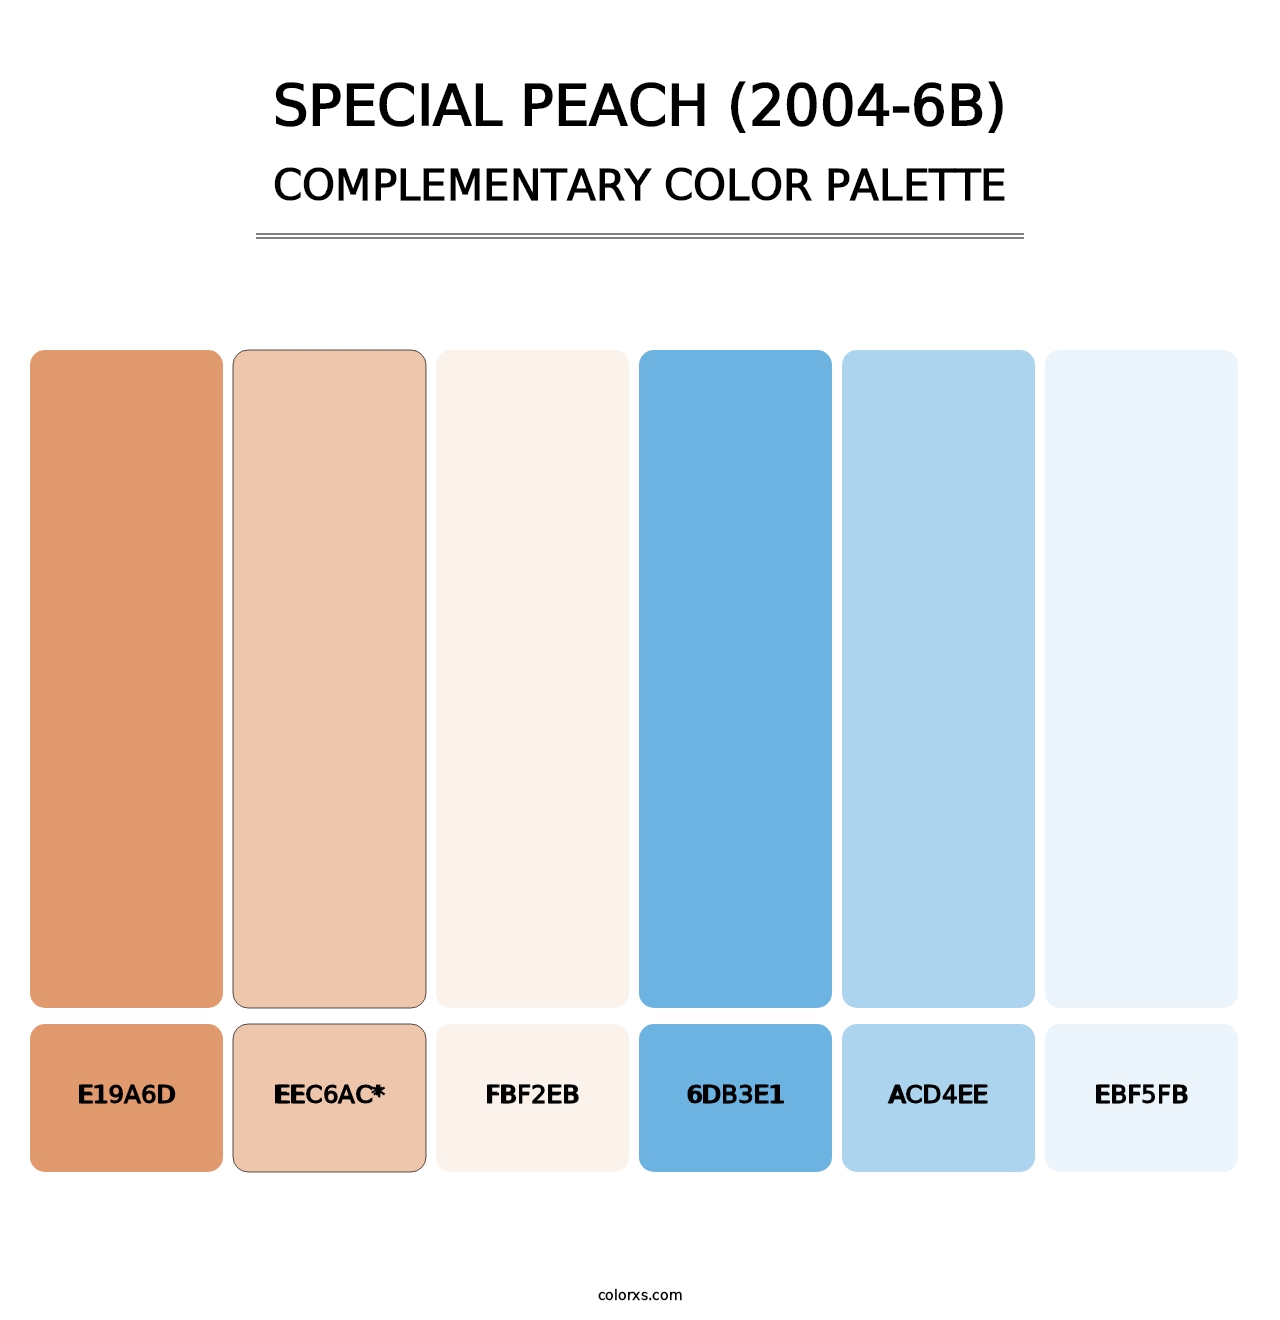 Special Peach (2004-6B) - Complementary Color Palette